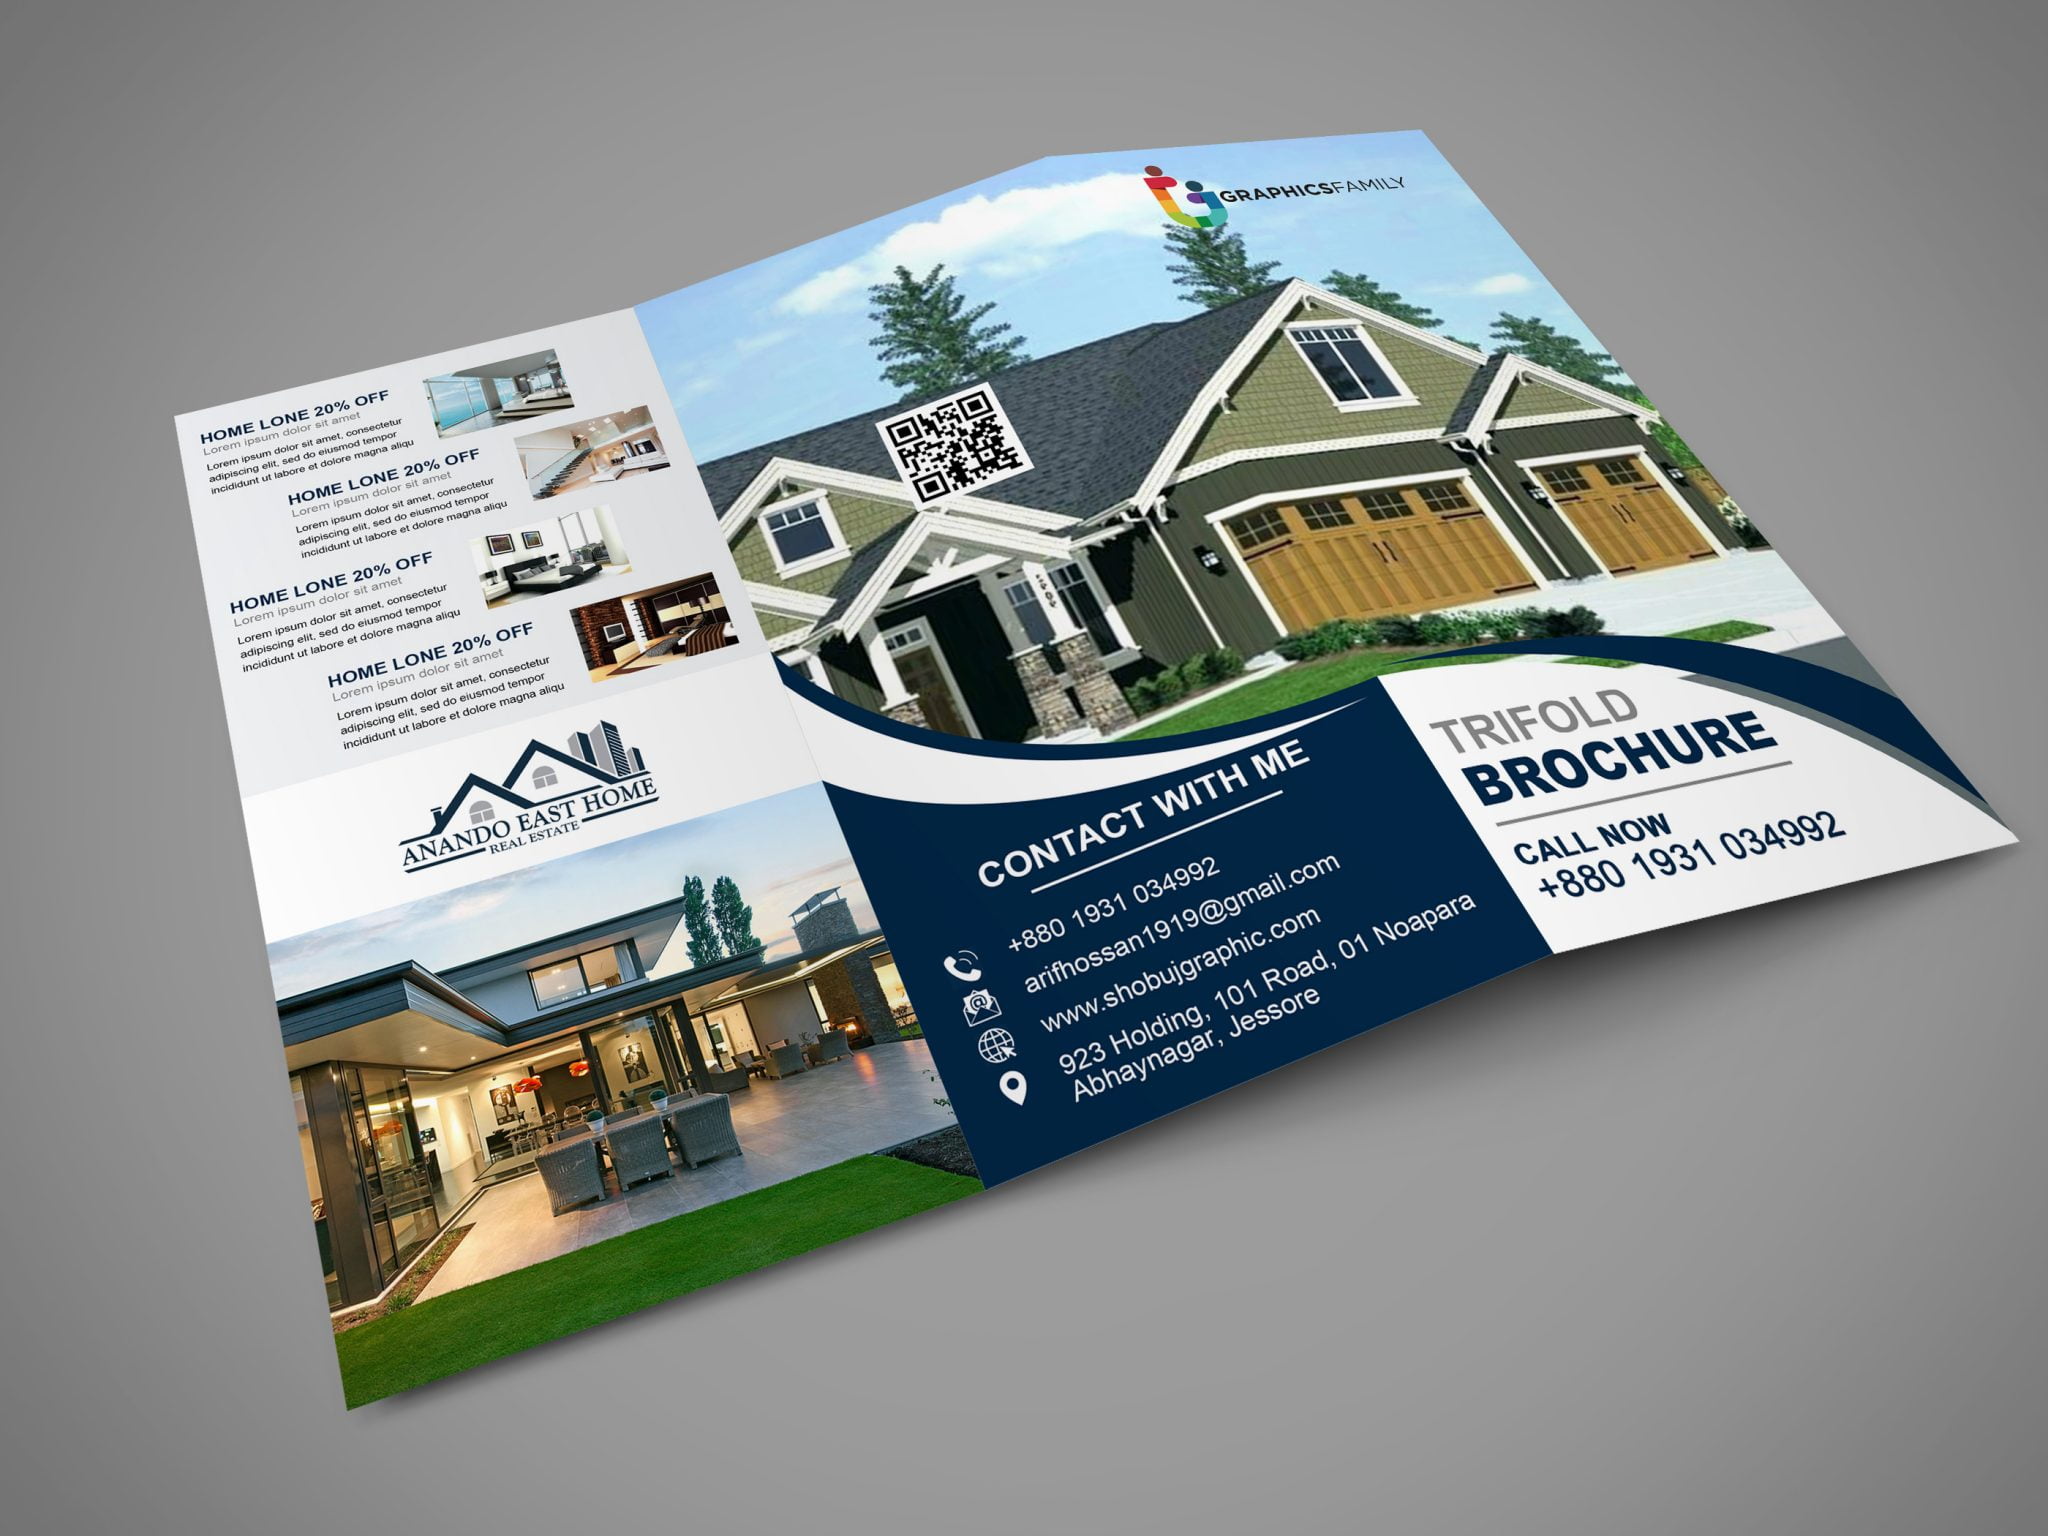 Creating a custom property brochure for potential buyers